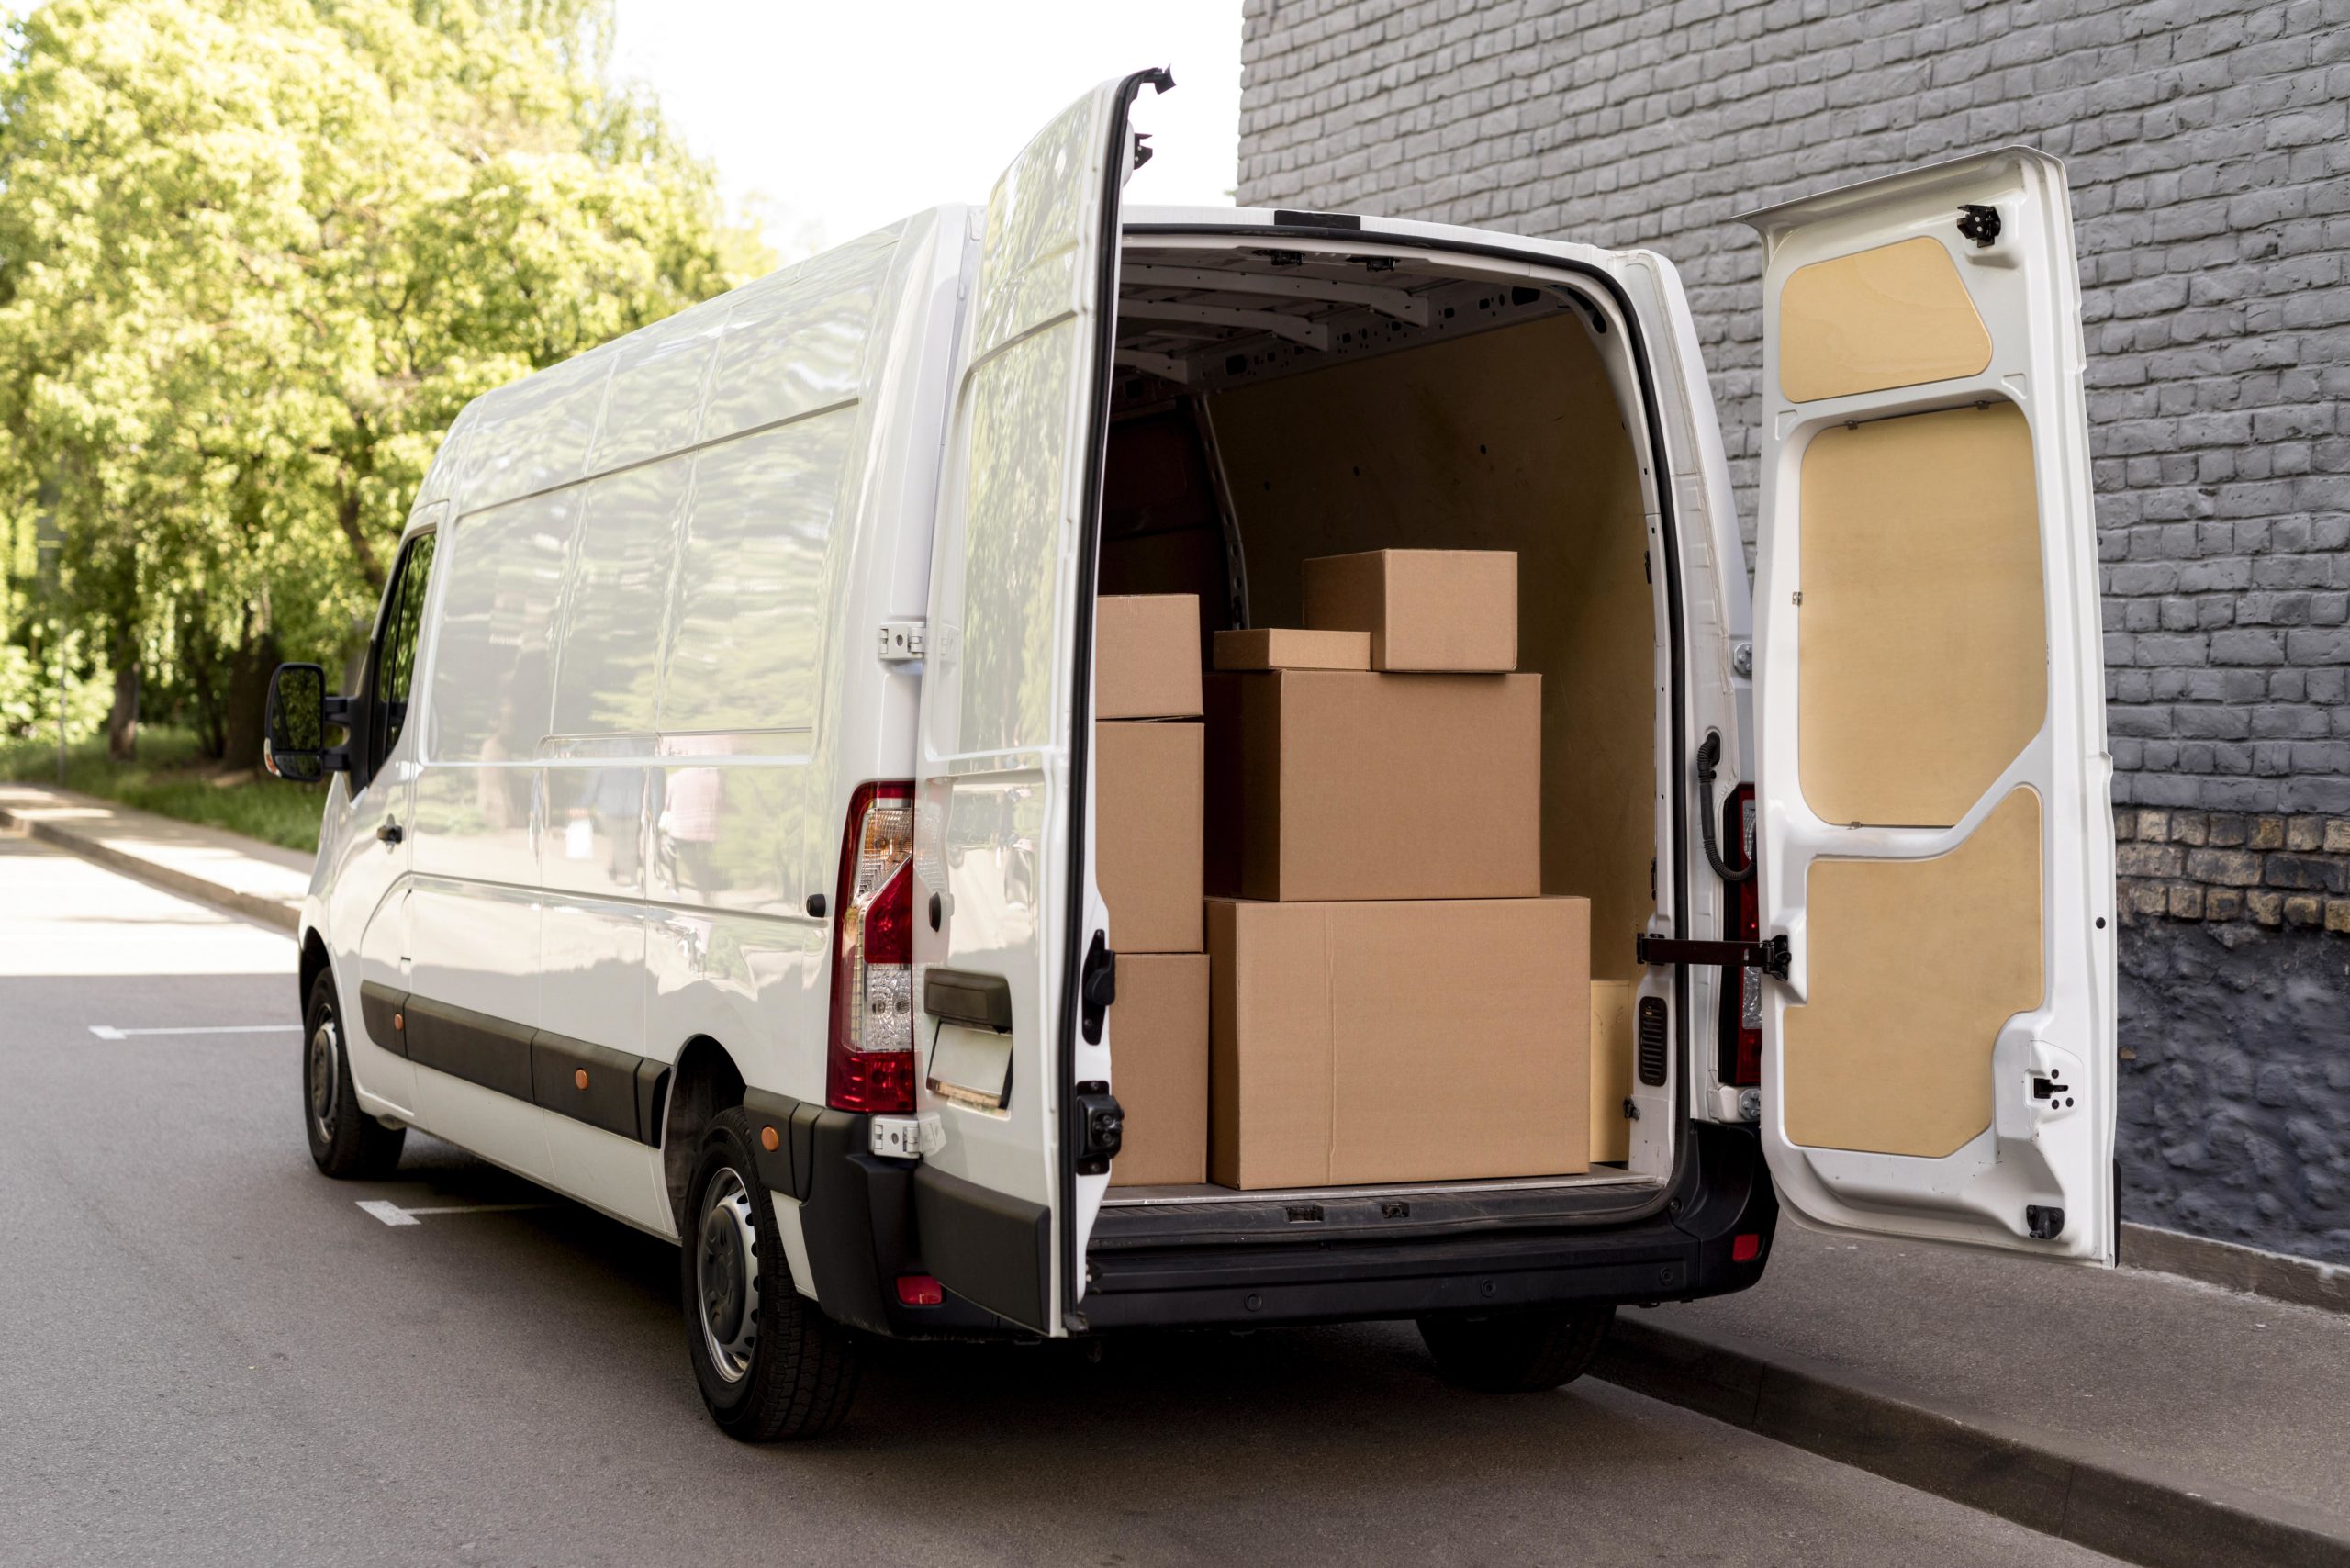 car-with-delivery-packages (1)